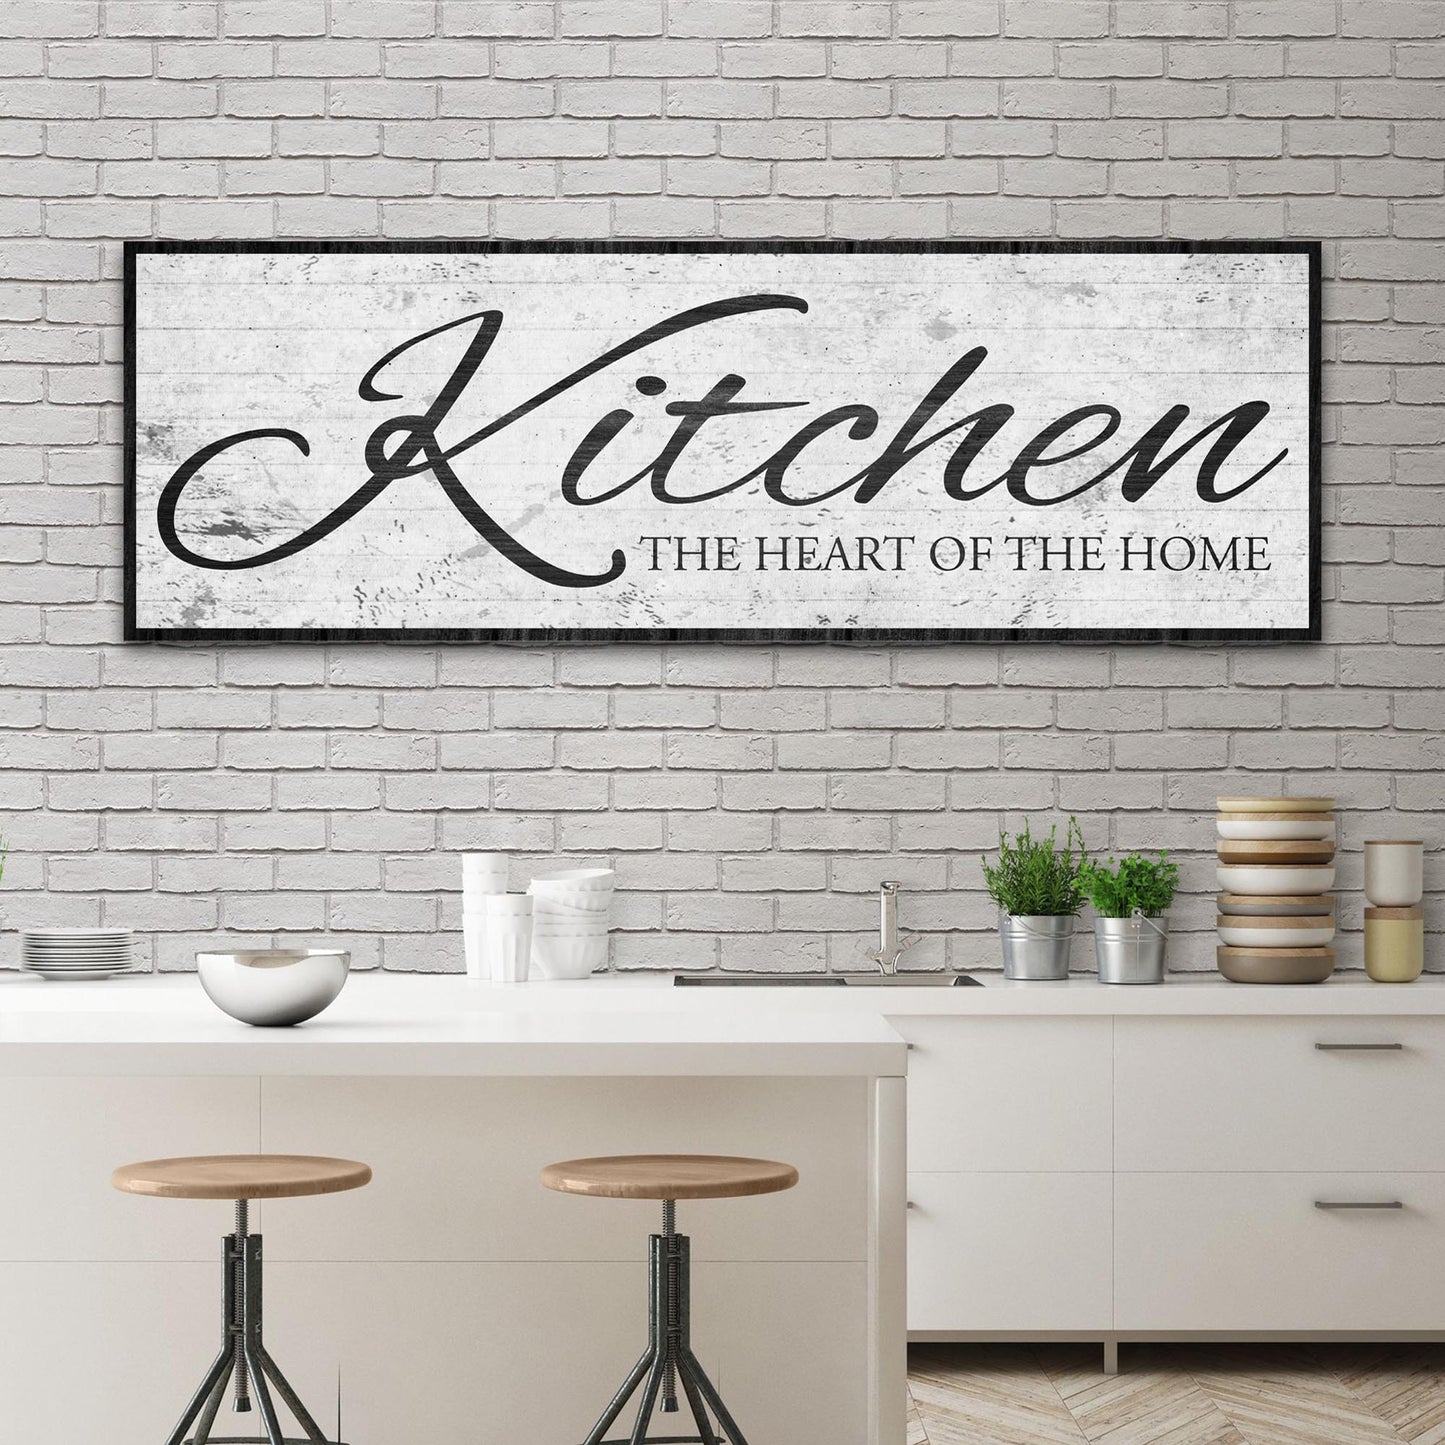 Kitchen Is The Heart Of The Home Sign II - Image by Tailored Canvases